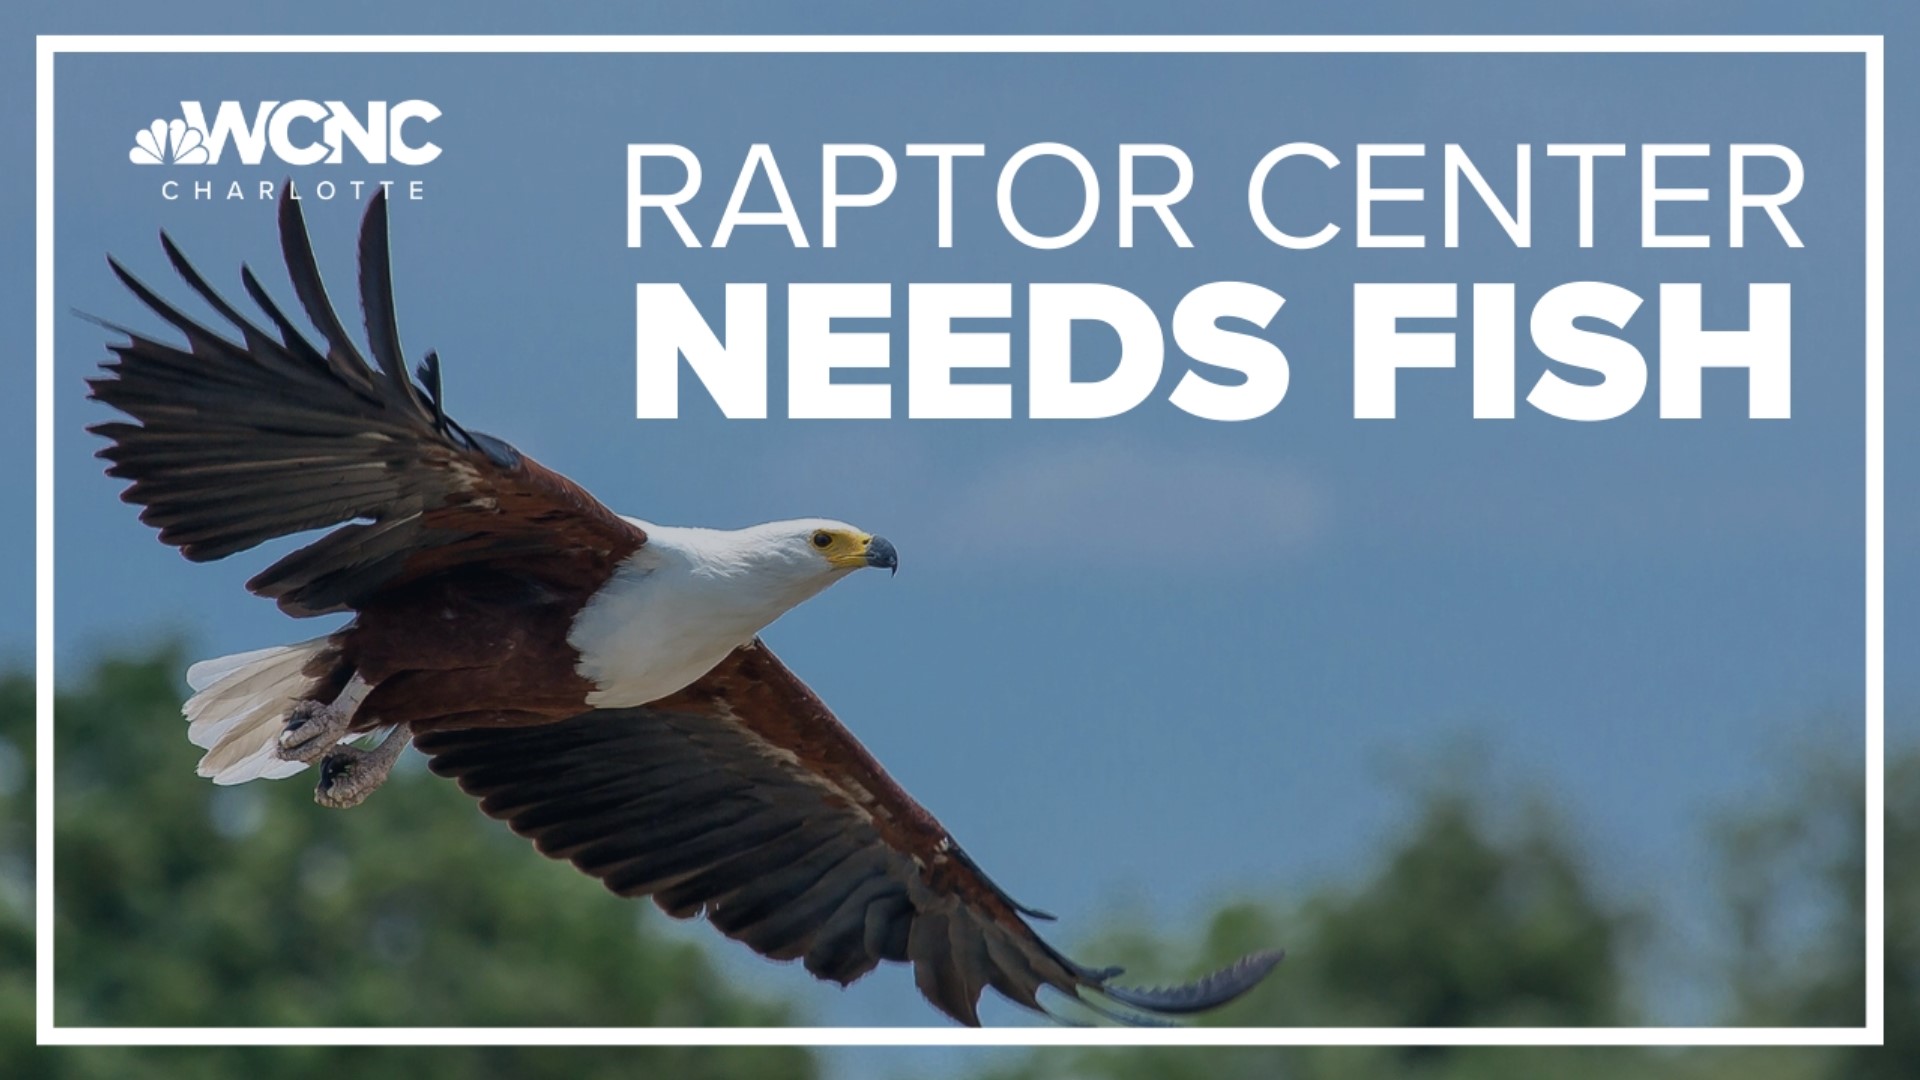 The Carolina Raptor Center is asking for donations of whole fish to feed the osprey and eagles they currently have in their rehabilitation center.